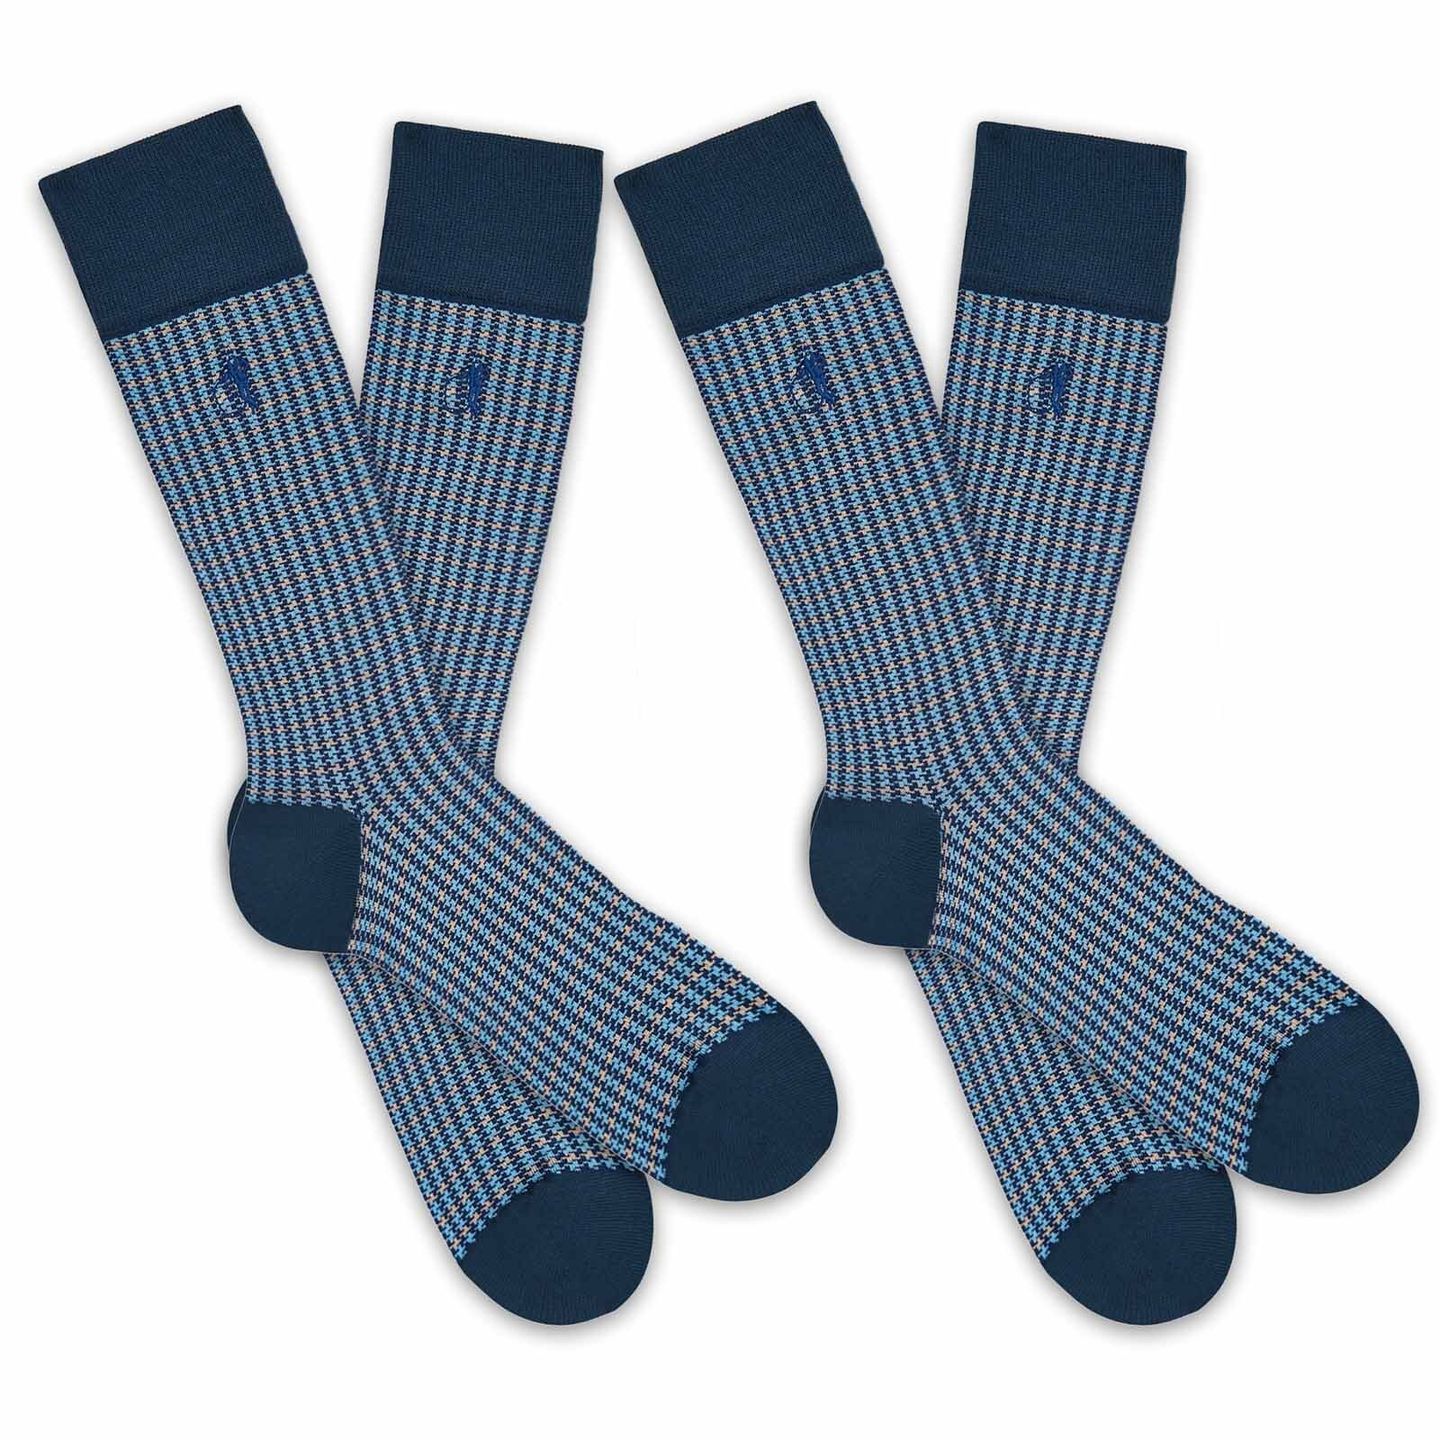 2 pairs of navy blue patterned Shaken and Stirred socks